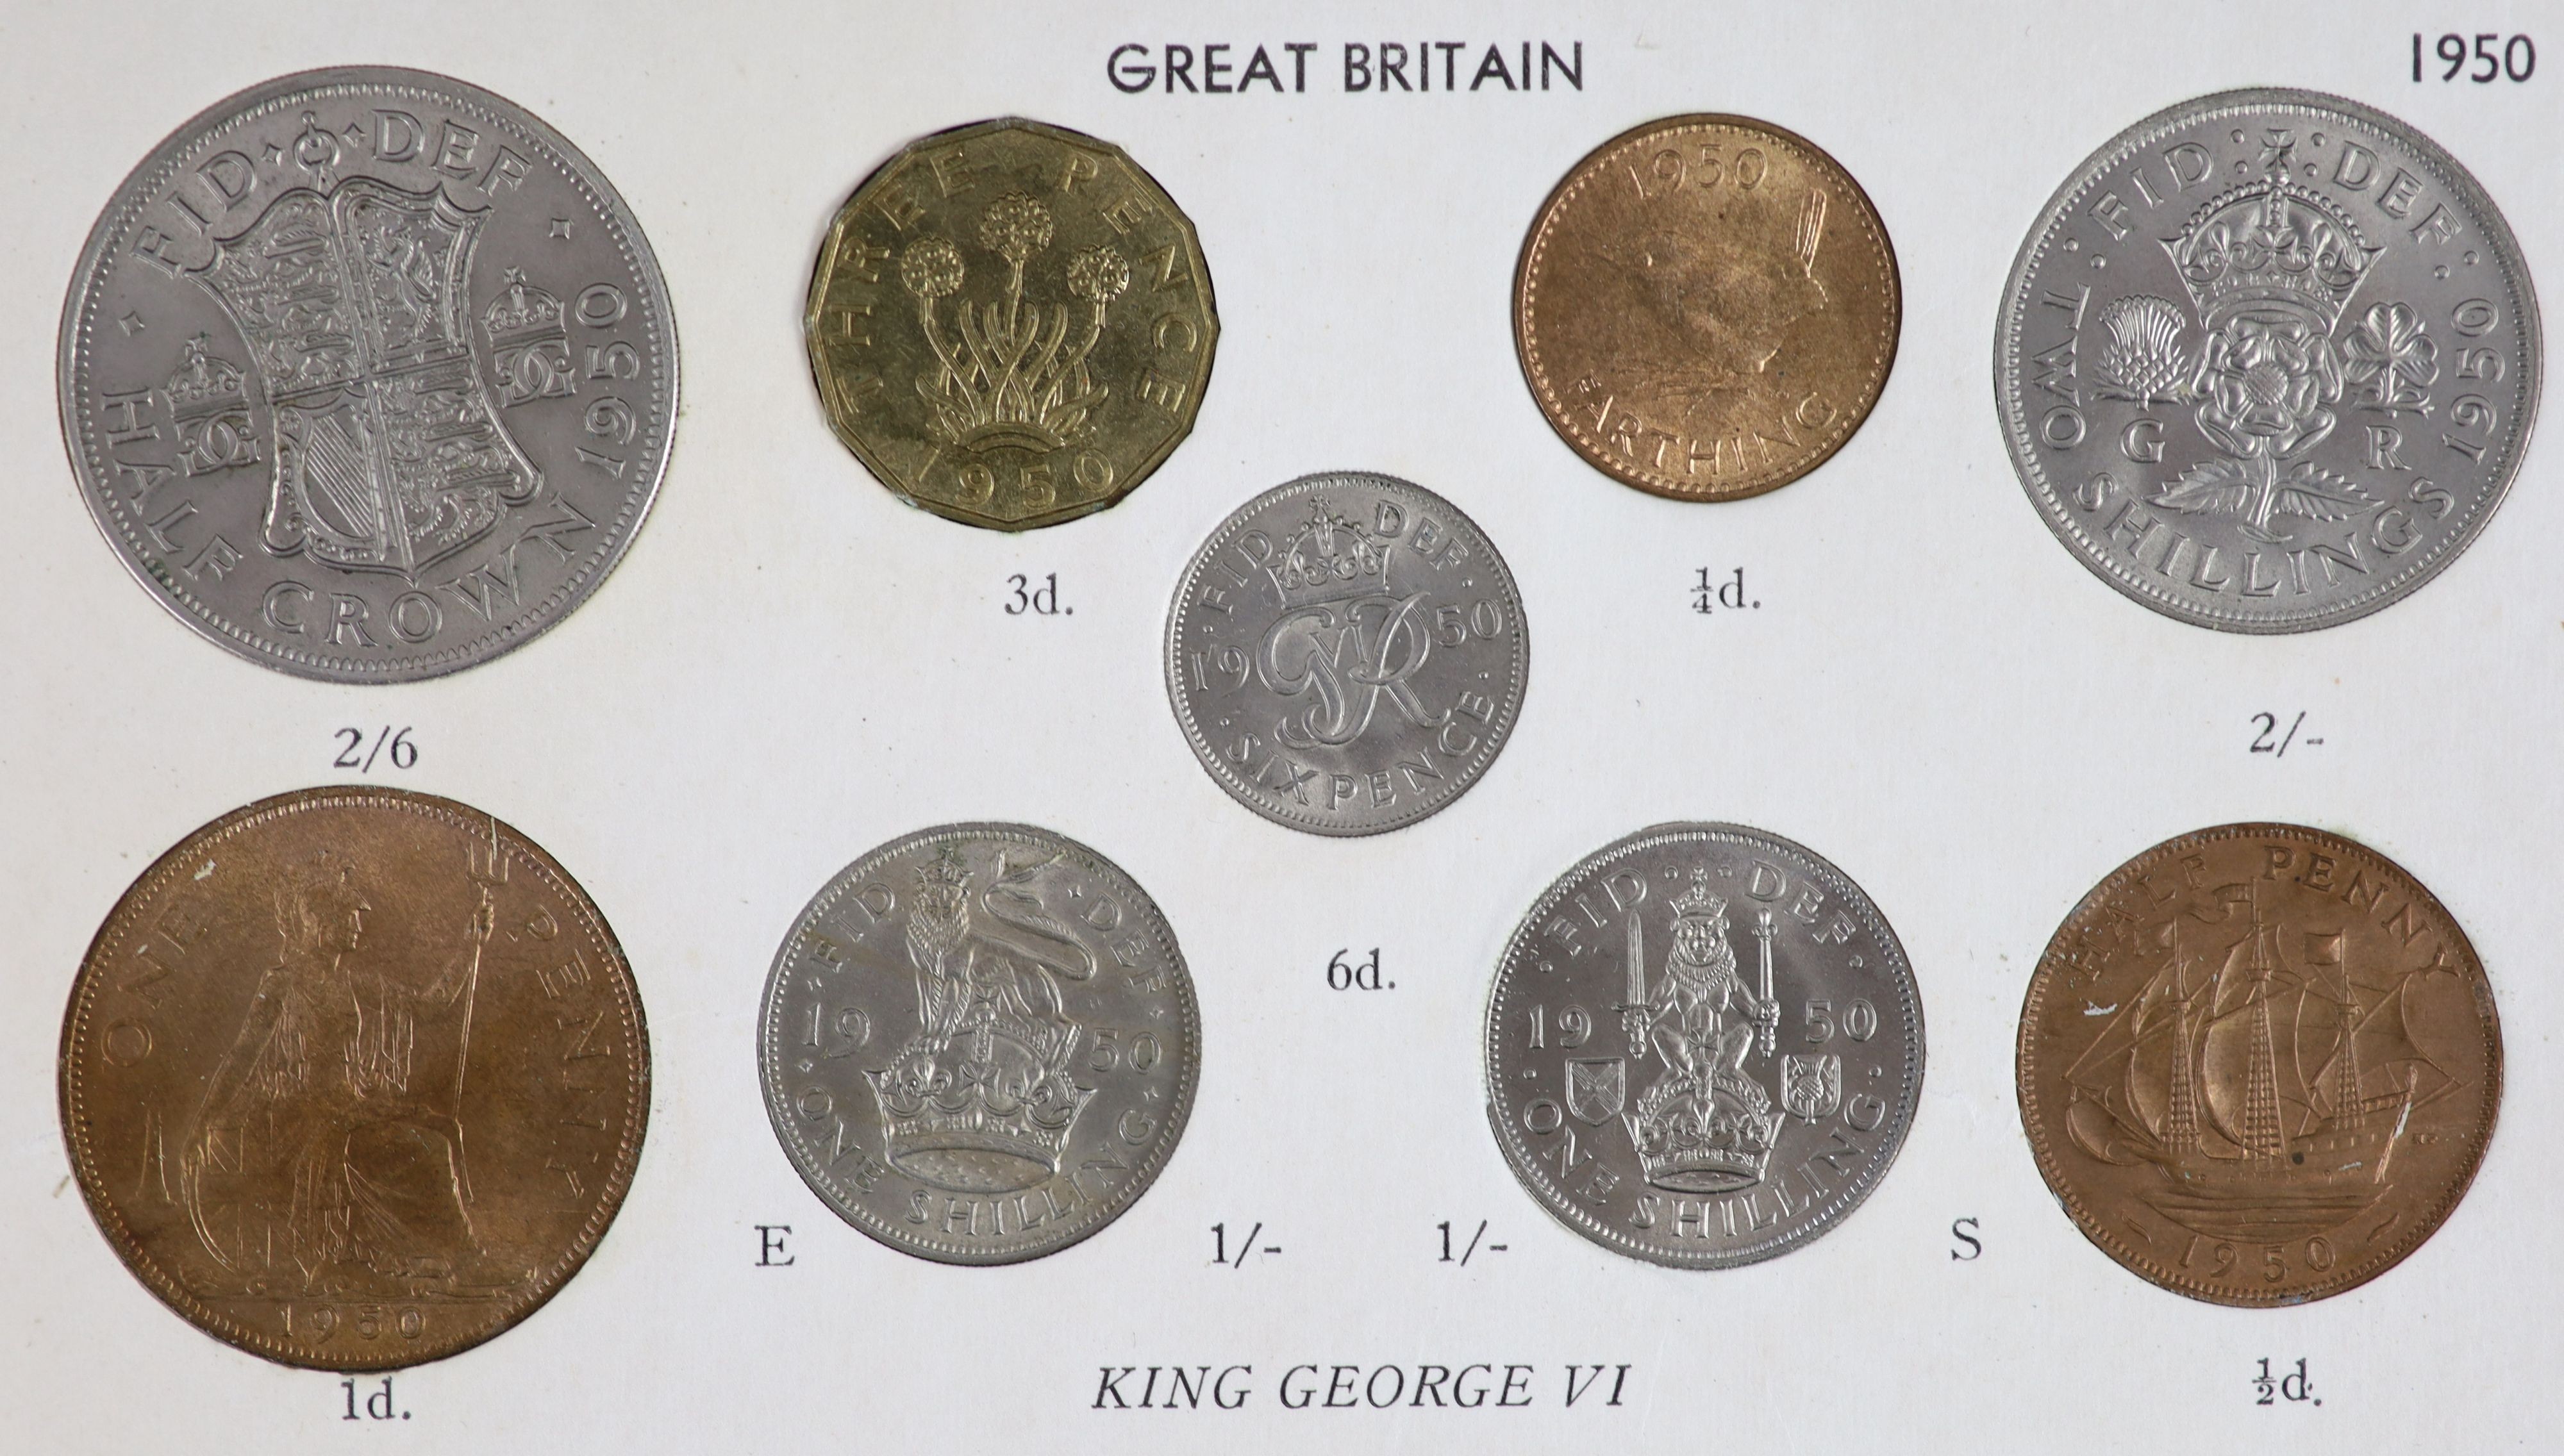 George VI specimen coin sets for 1950 and 1951, second issue, including 1950 threepence, aUNC, 1951 threepence and penny, both EF